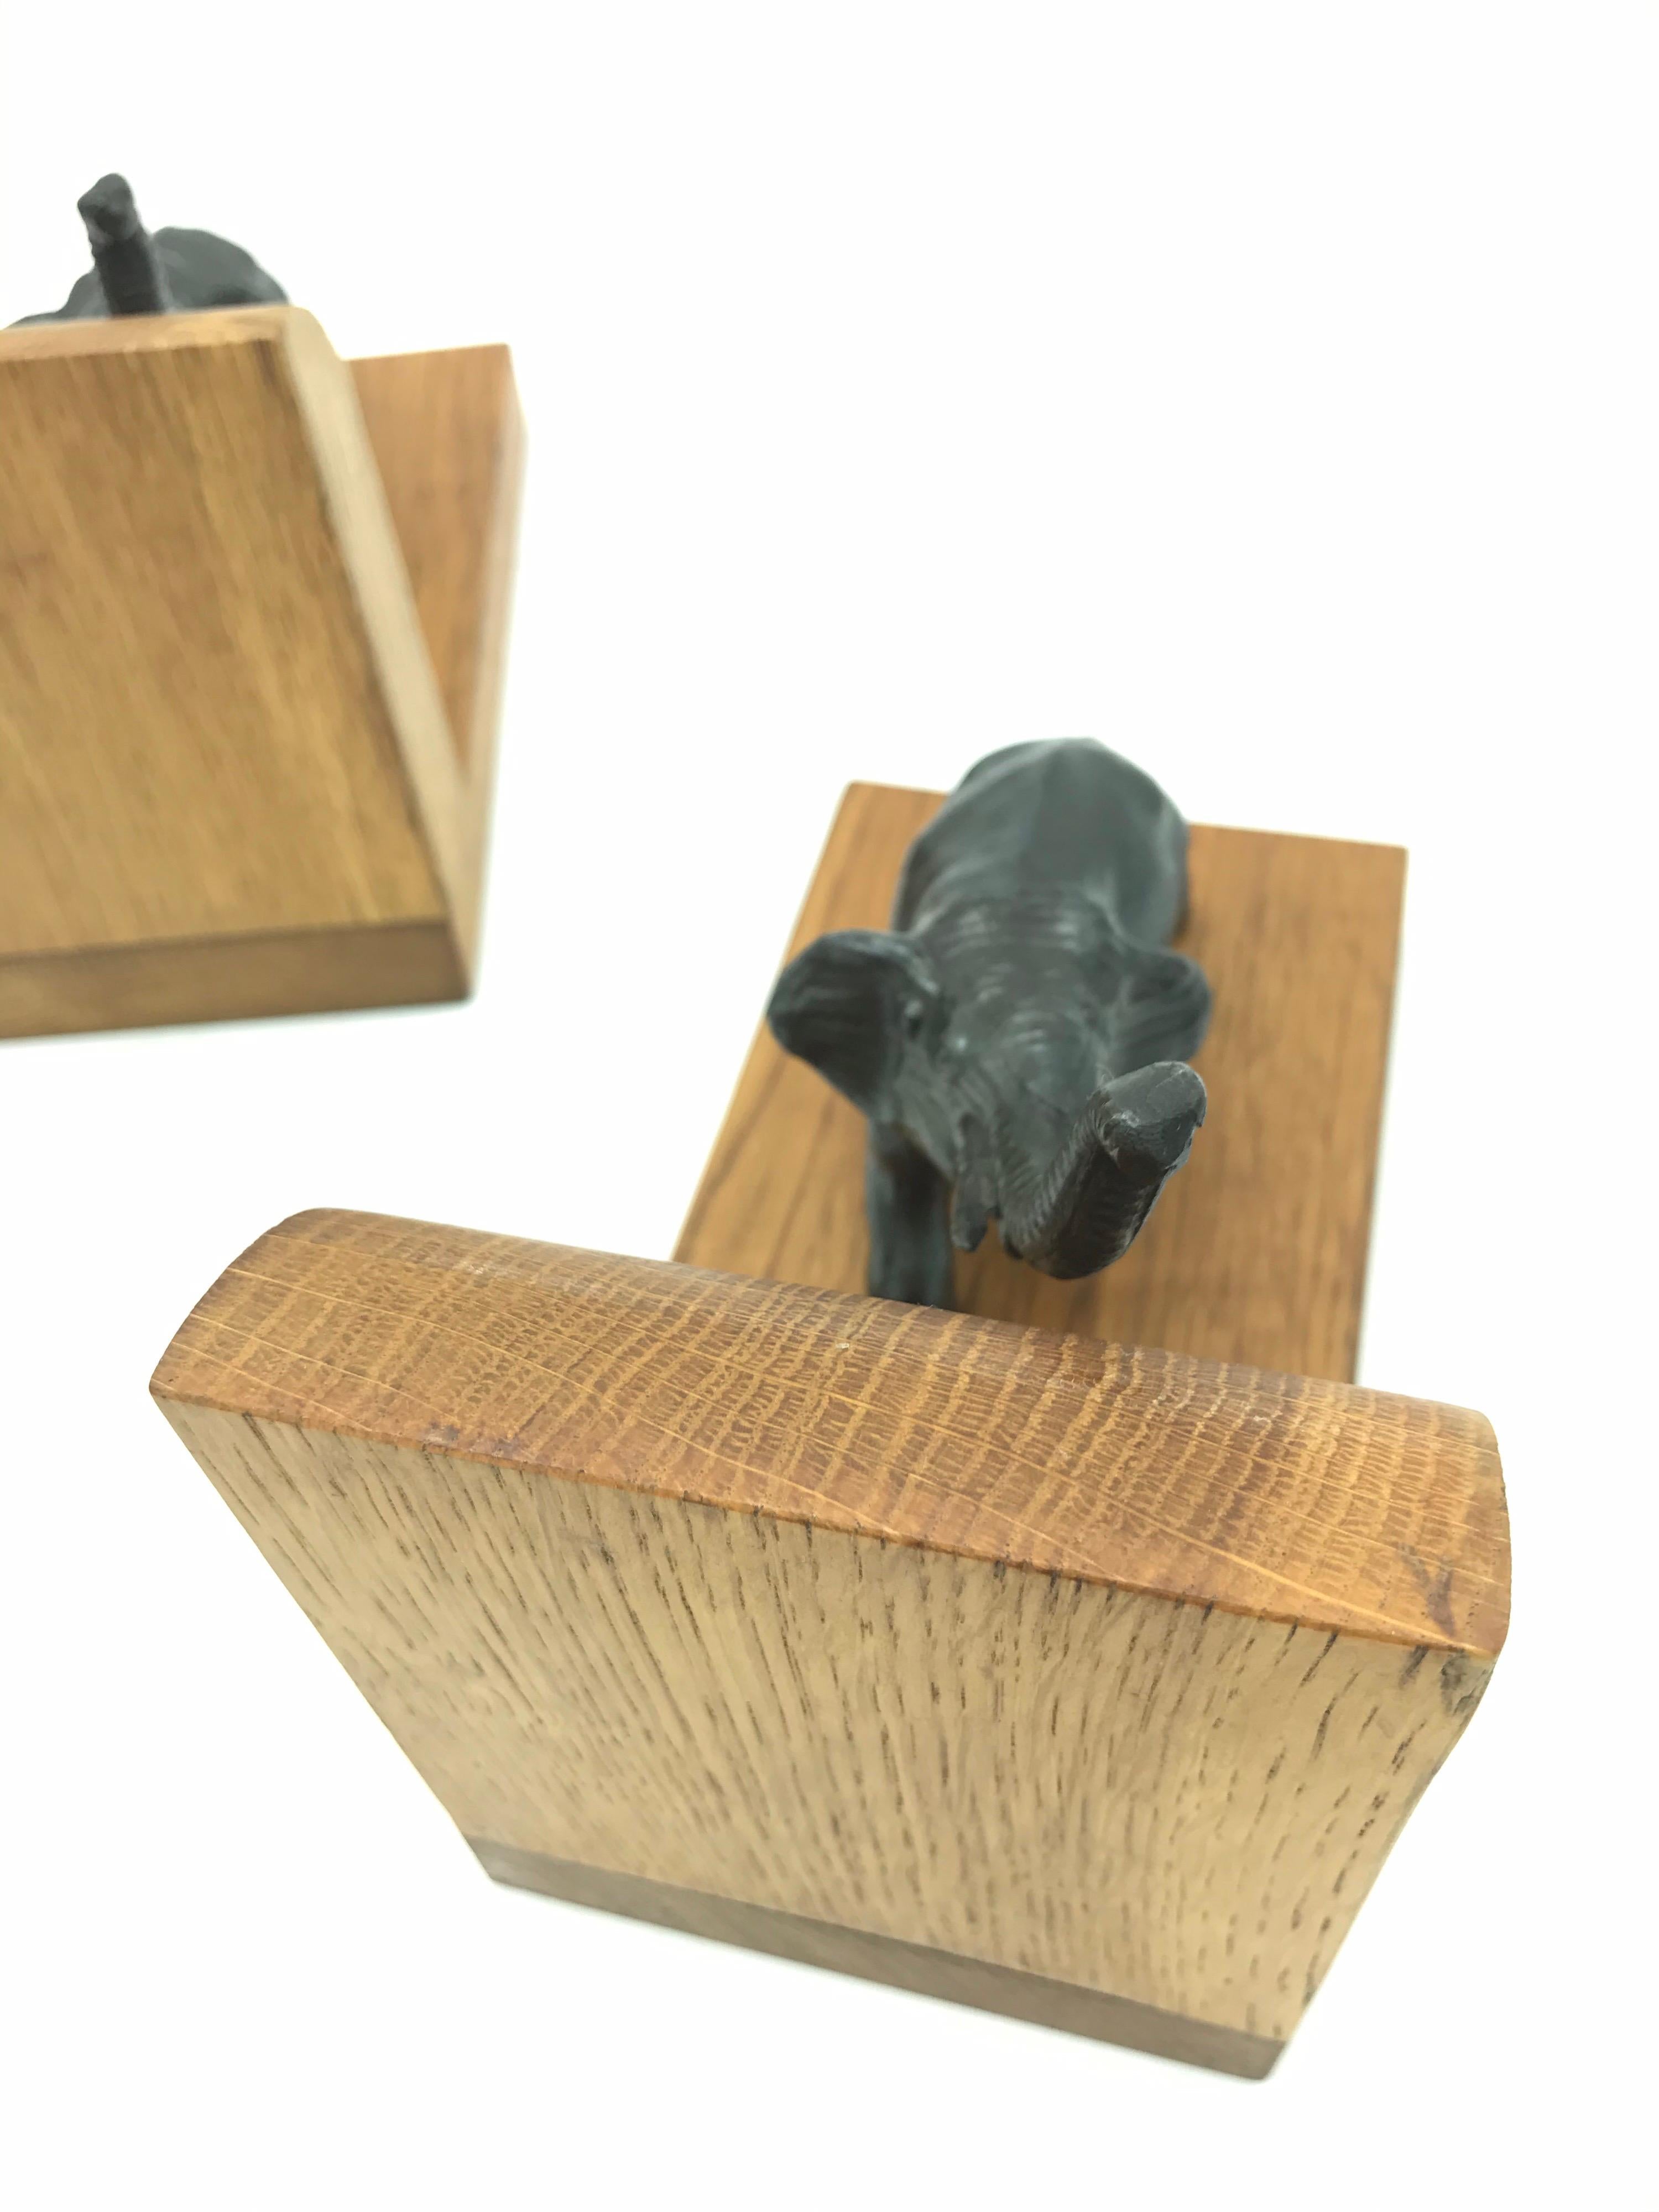 Amazing Pair of Art Deco Elephant Book Ends from the 1930s 5